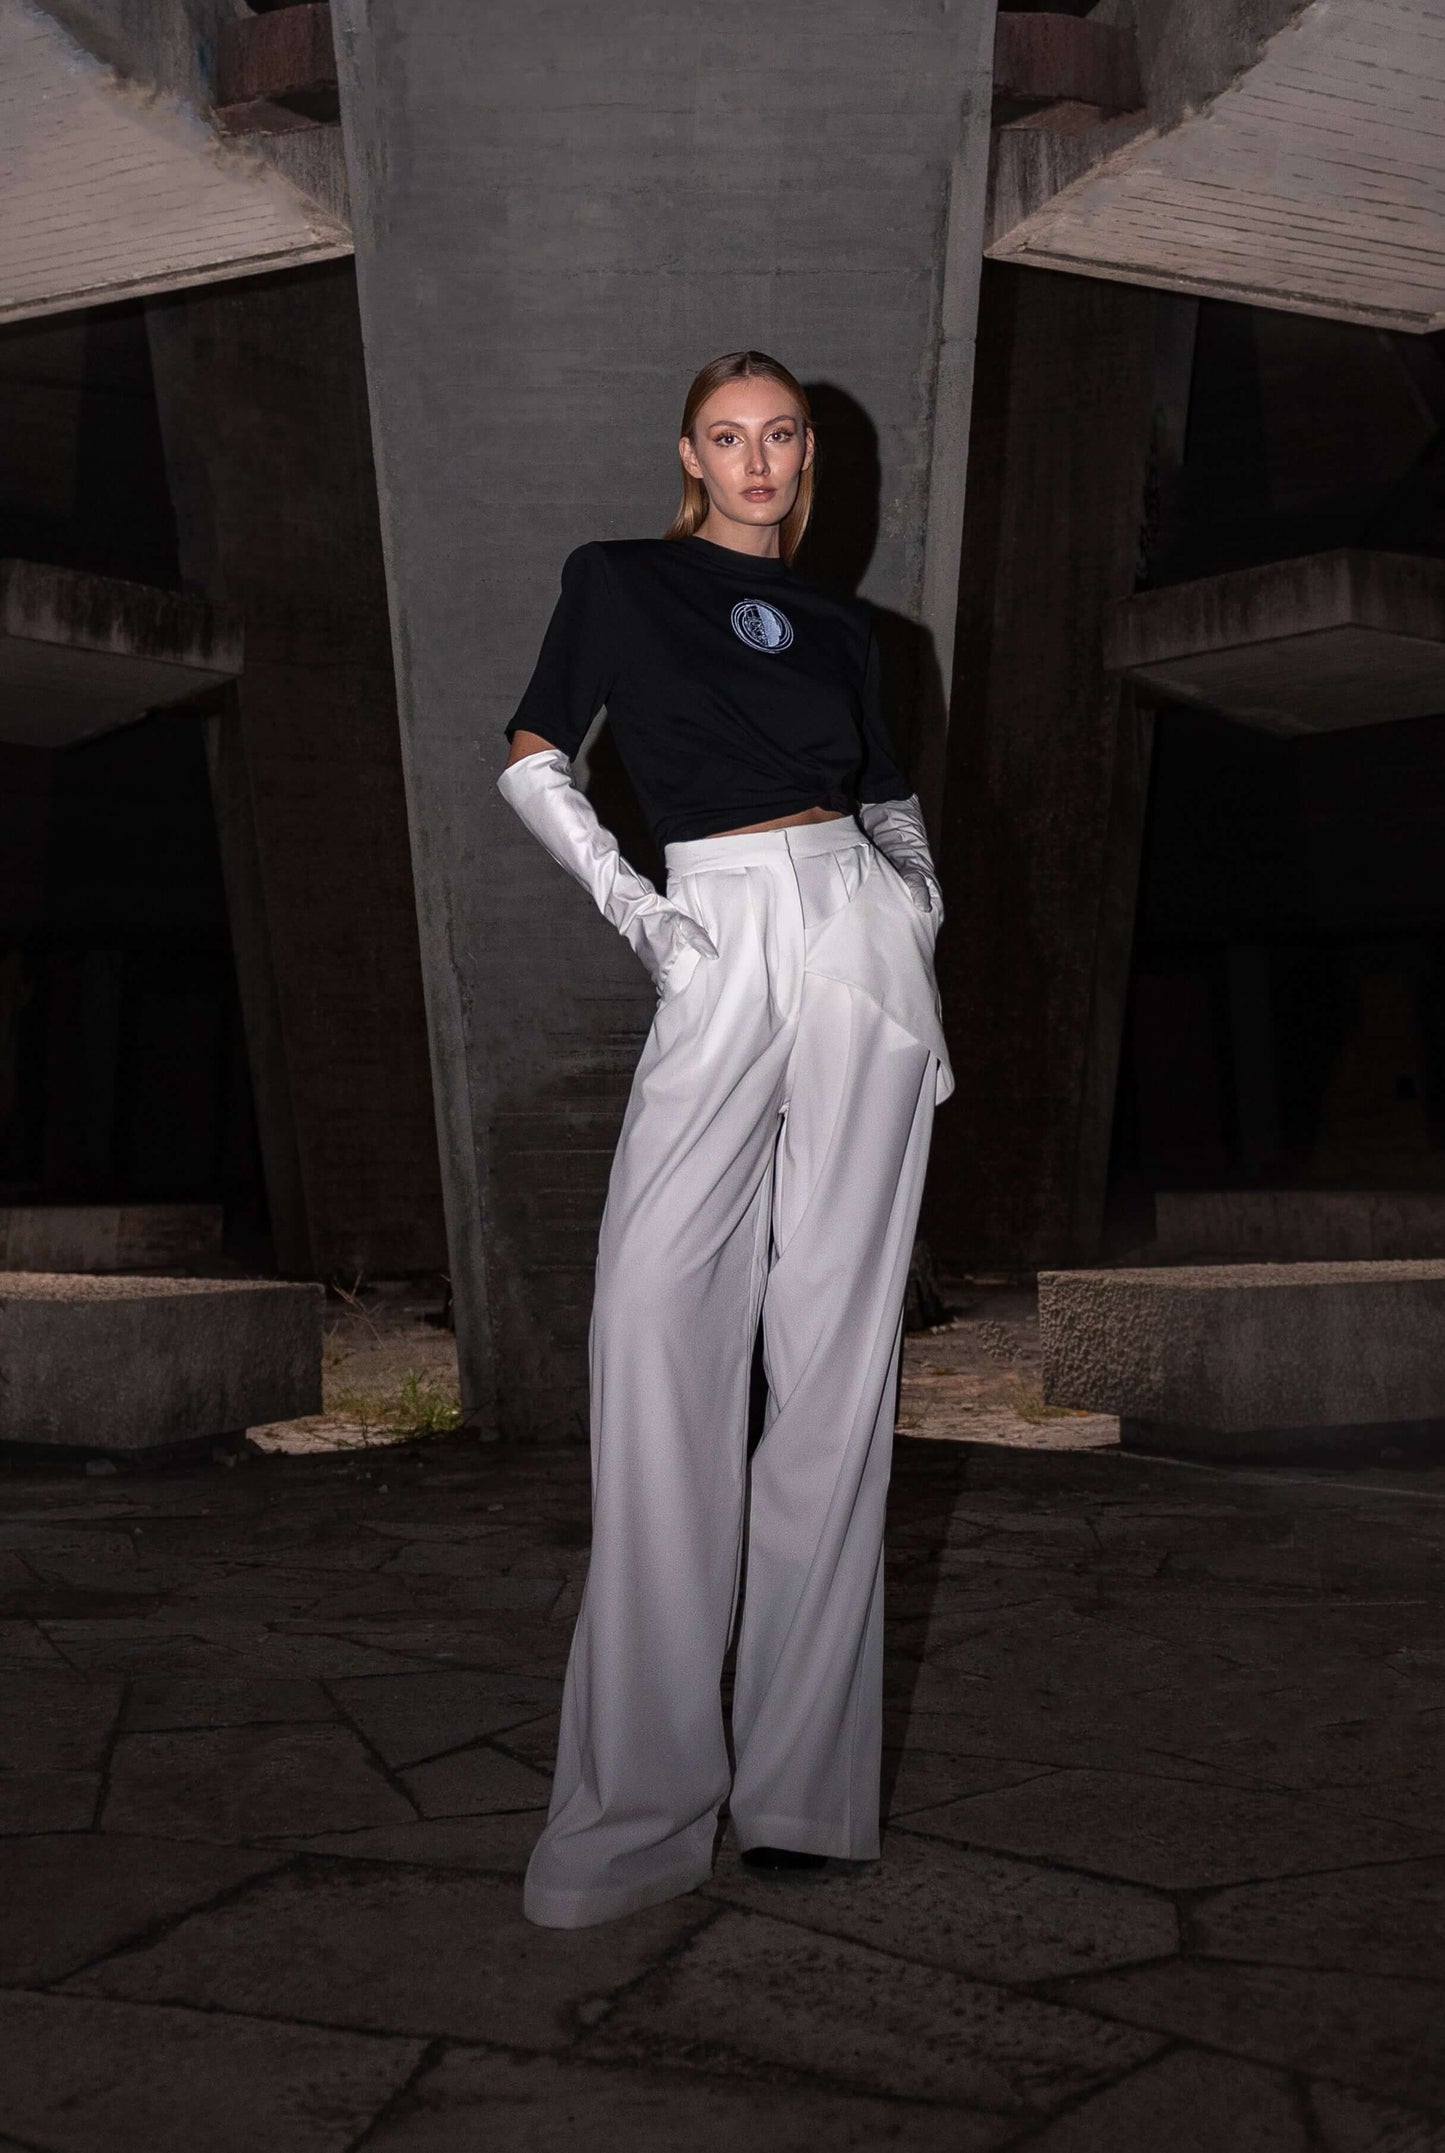 The model wears a black, oversized silhouette t-shirt with face embroidery in white. The outfit also contains long trousers and gloves, complimenting the black t-shirt with white spiral embroidery. The footwear is not visible in this photograph. An editorial photograph in an architectural monument in Plovdiv, Bulgaria.